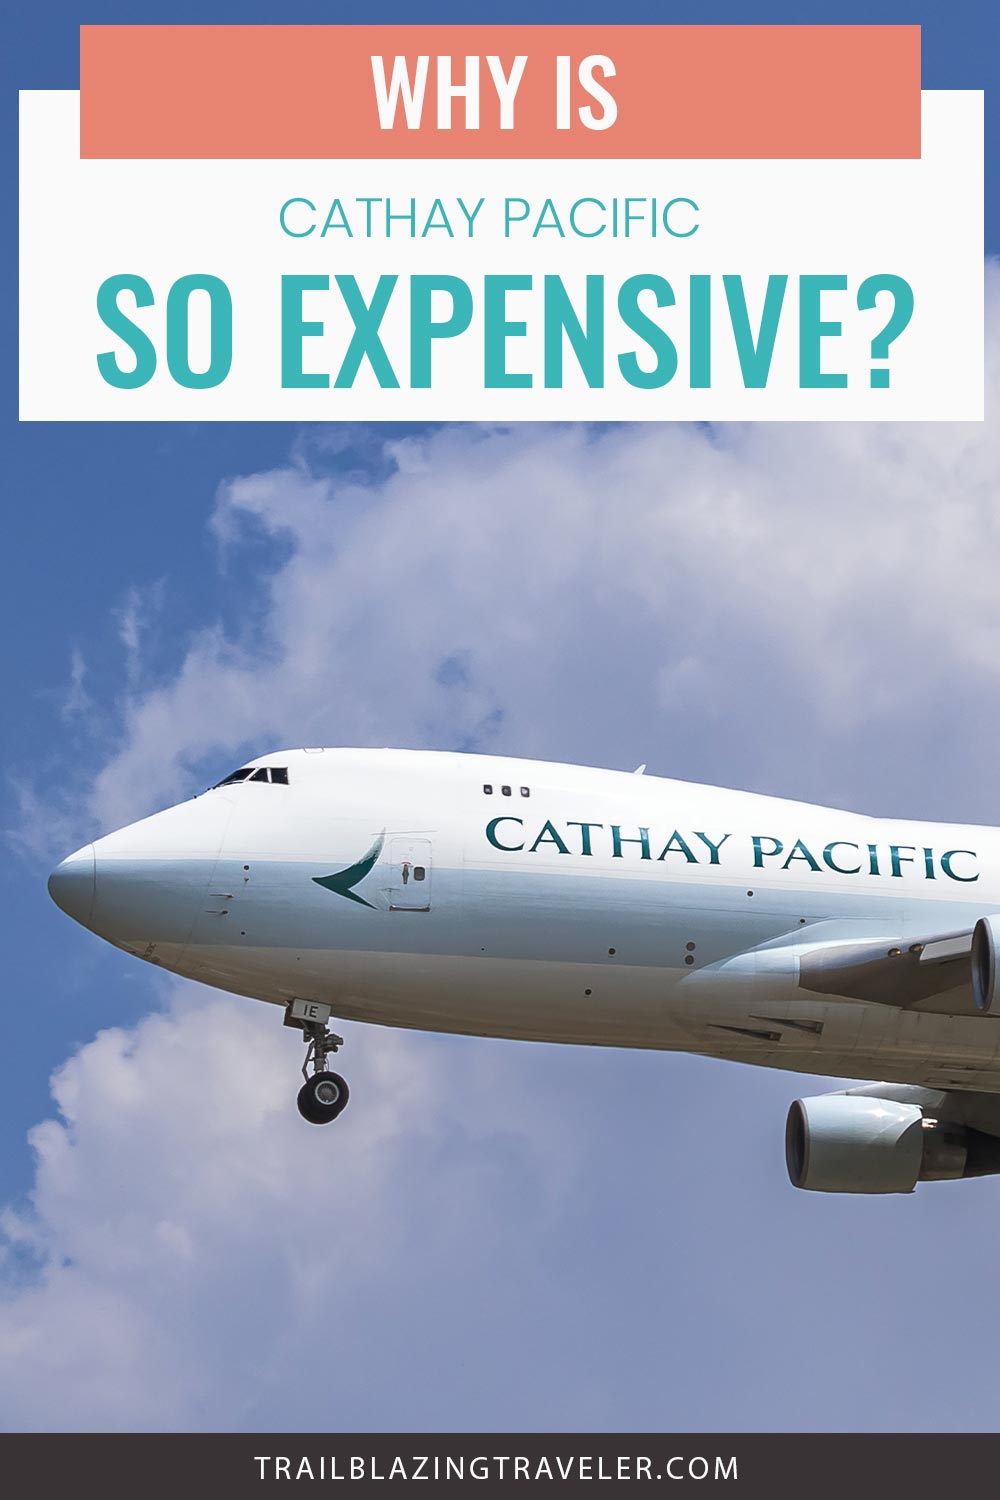 Why Is Cathay Pacific So Expensive?